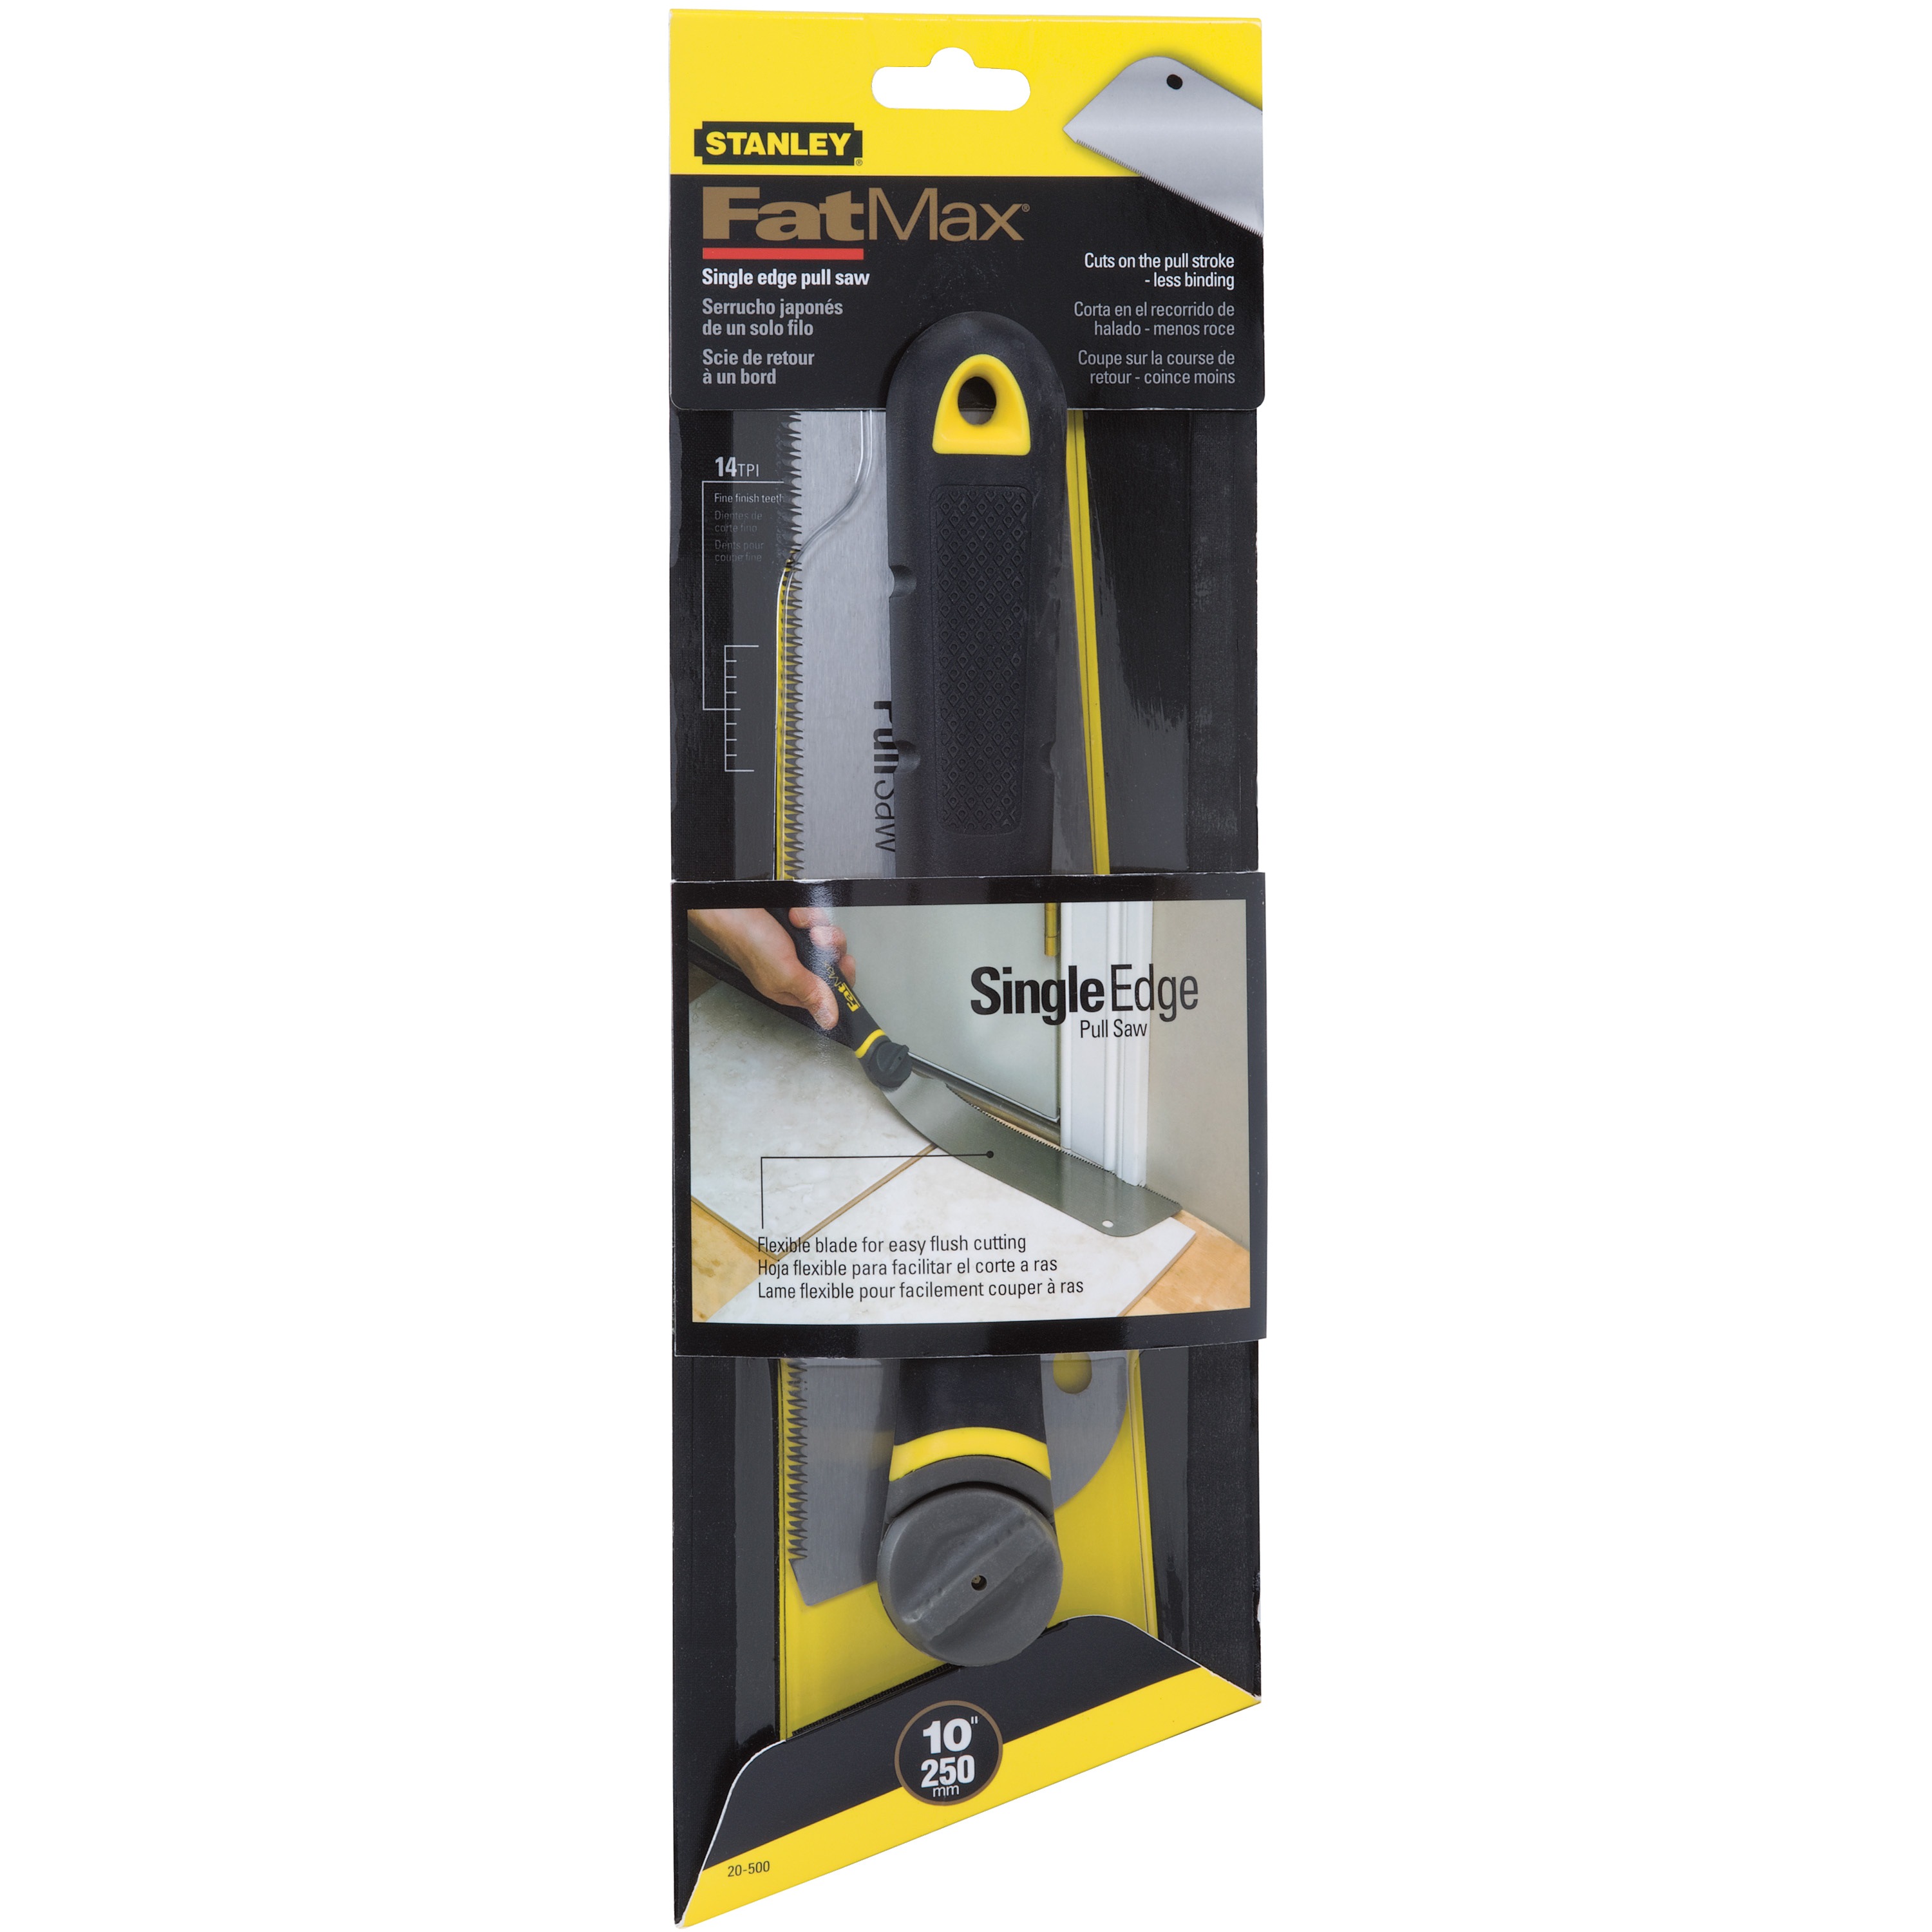 Stanley Tools - 9 in FATMAX Single Edge Pull Saw - 20-500